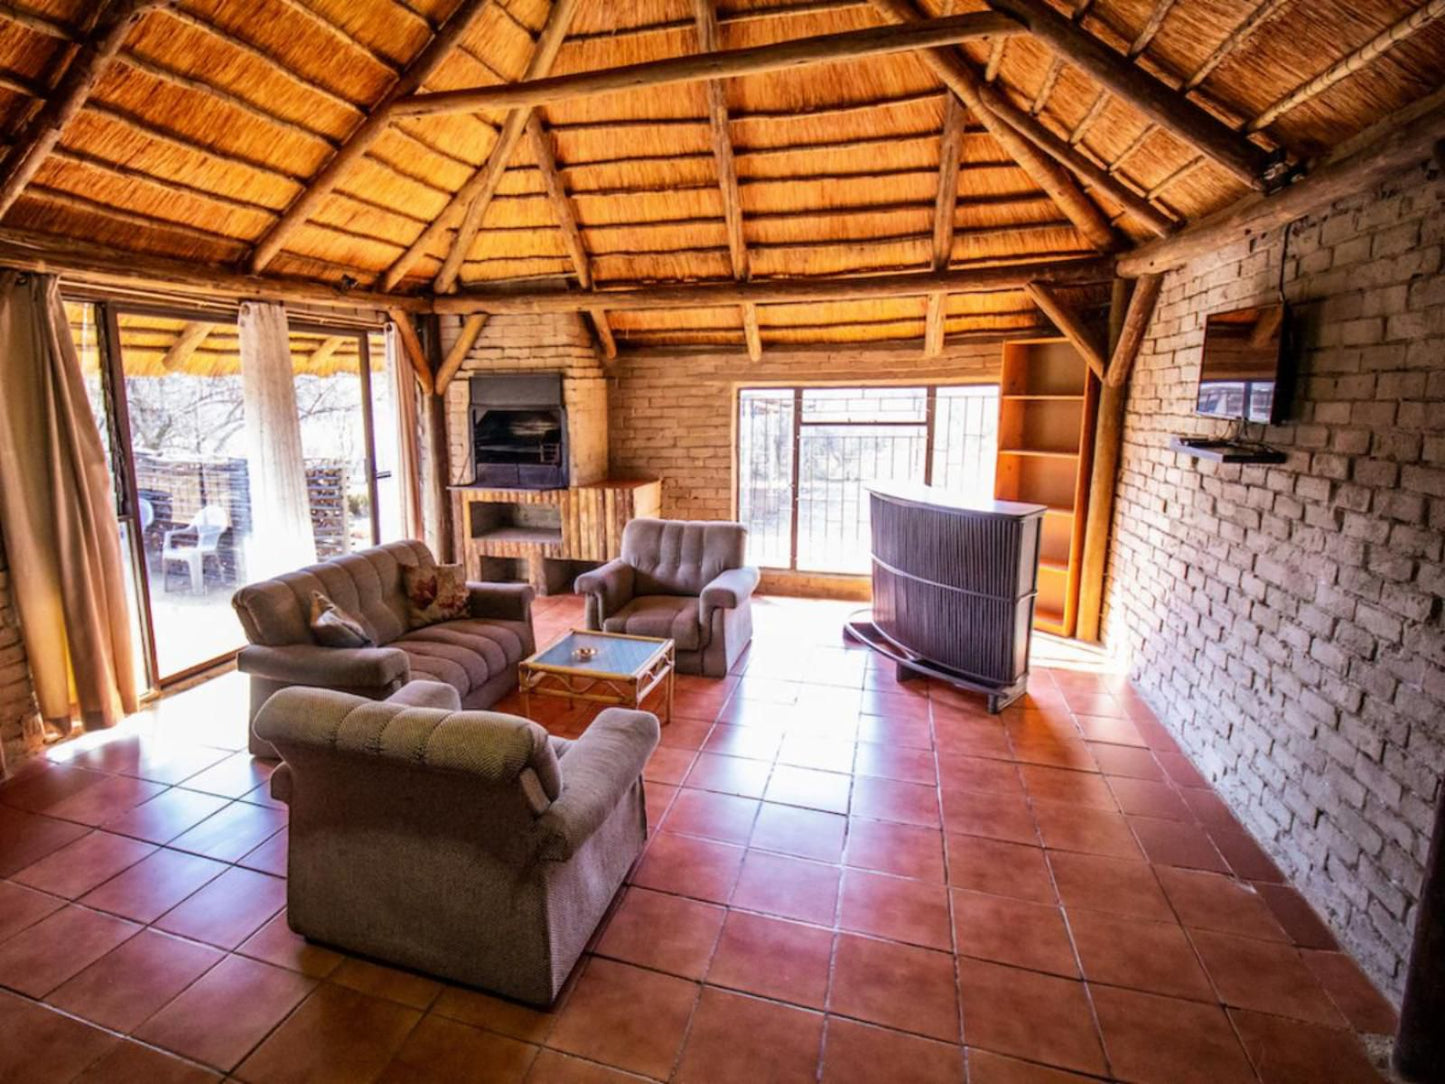 Inyala Game Lodge Ventersdorp North West Province South Africa Cabin, Building, Architecture, Living Room